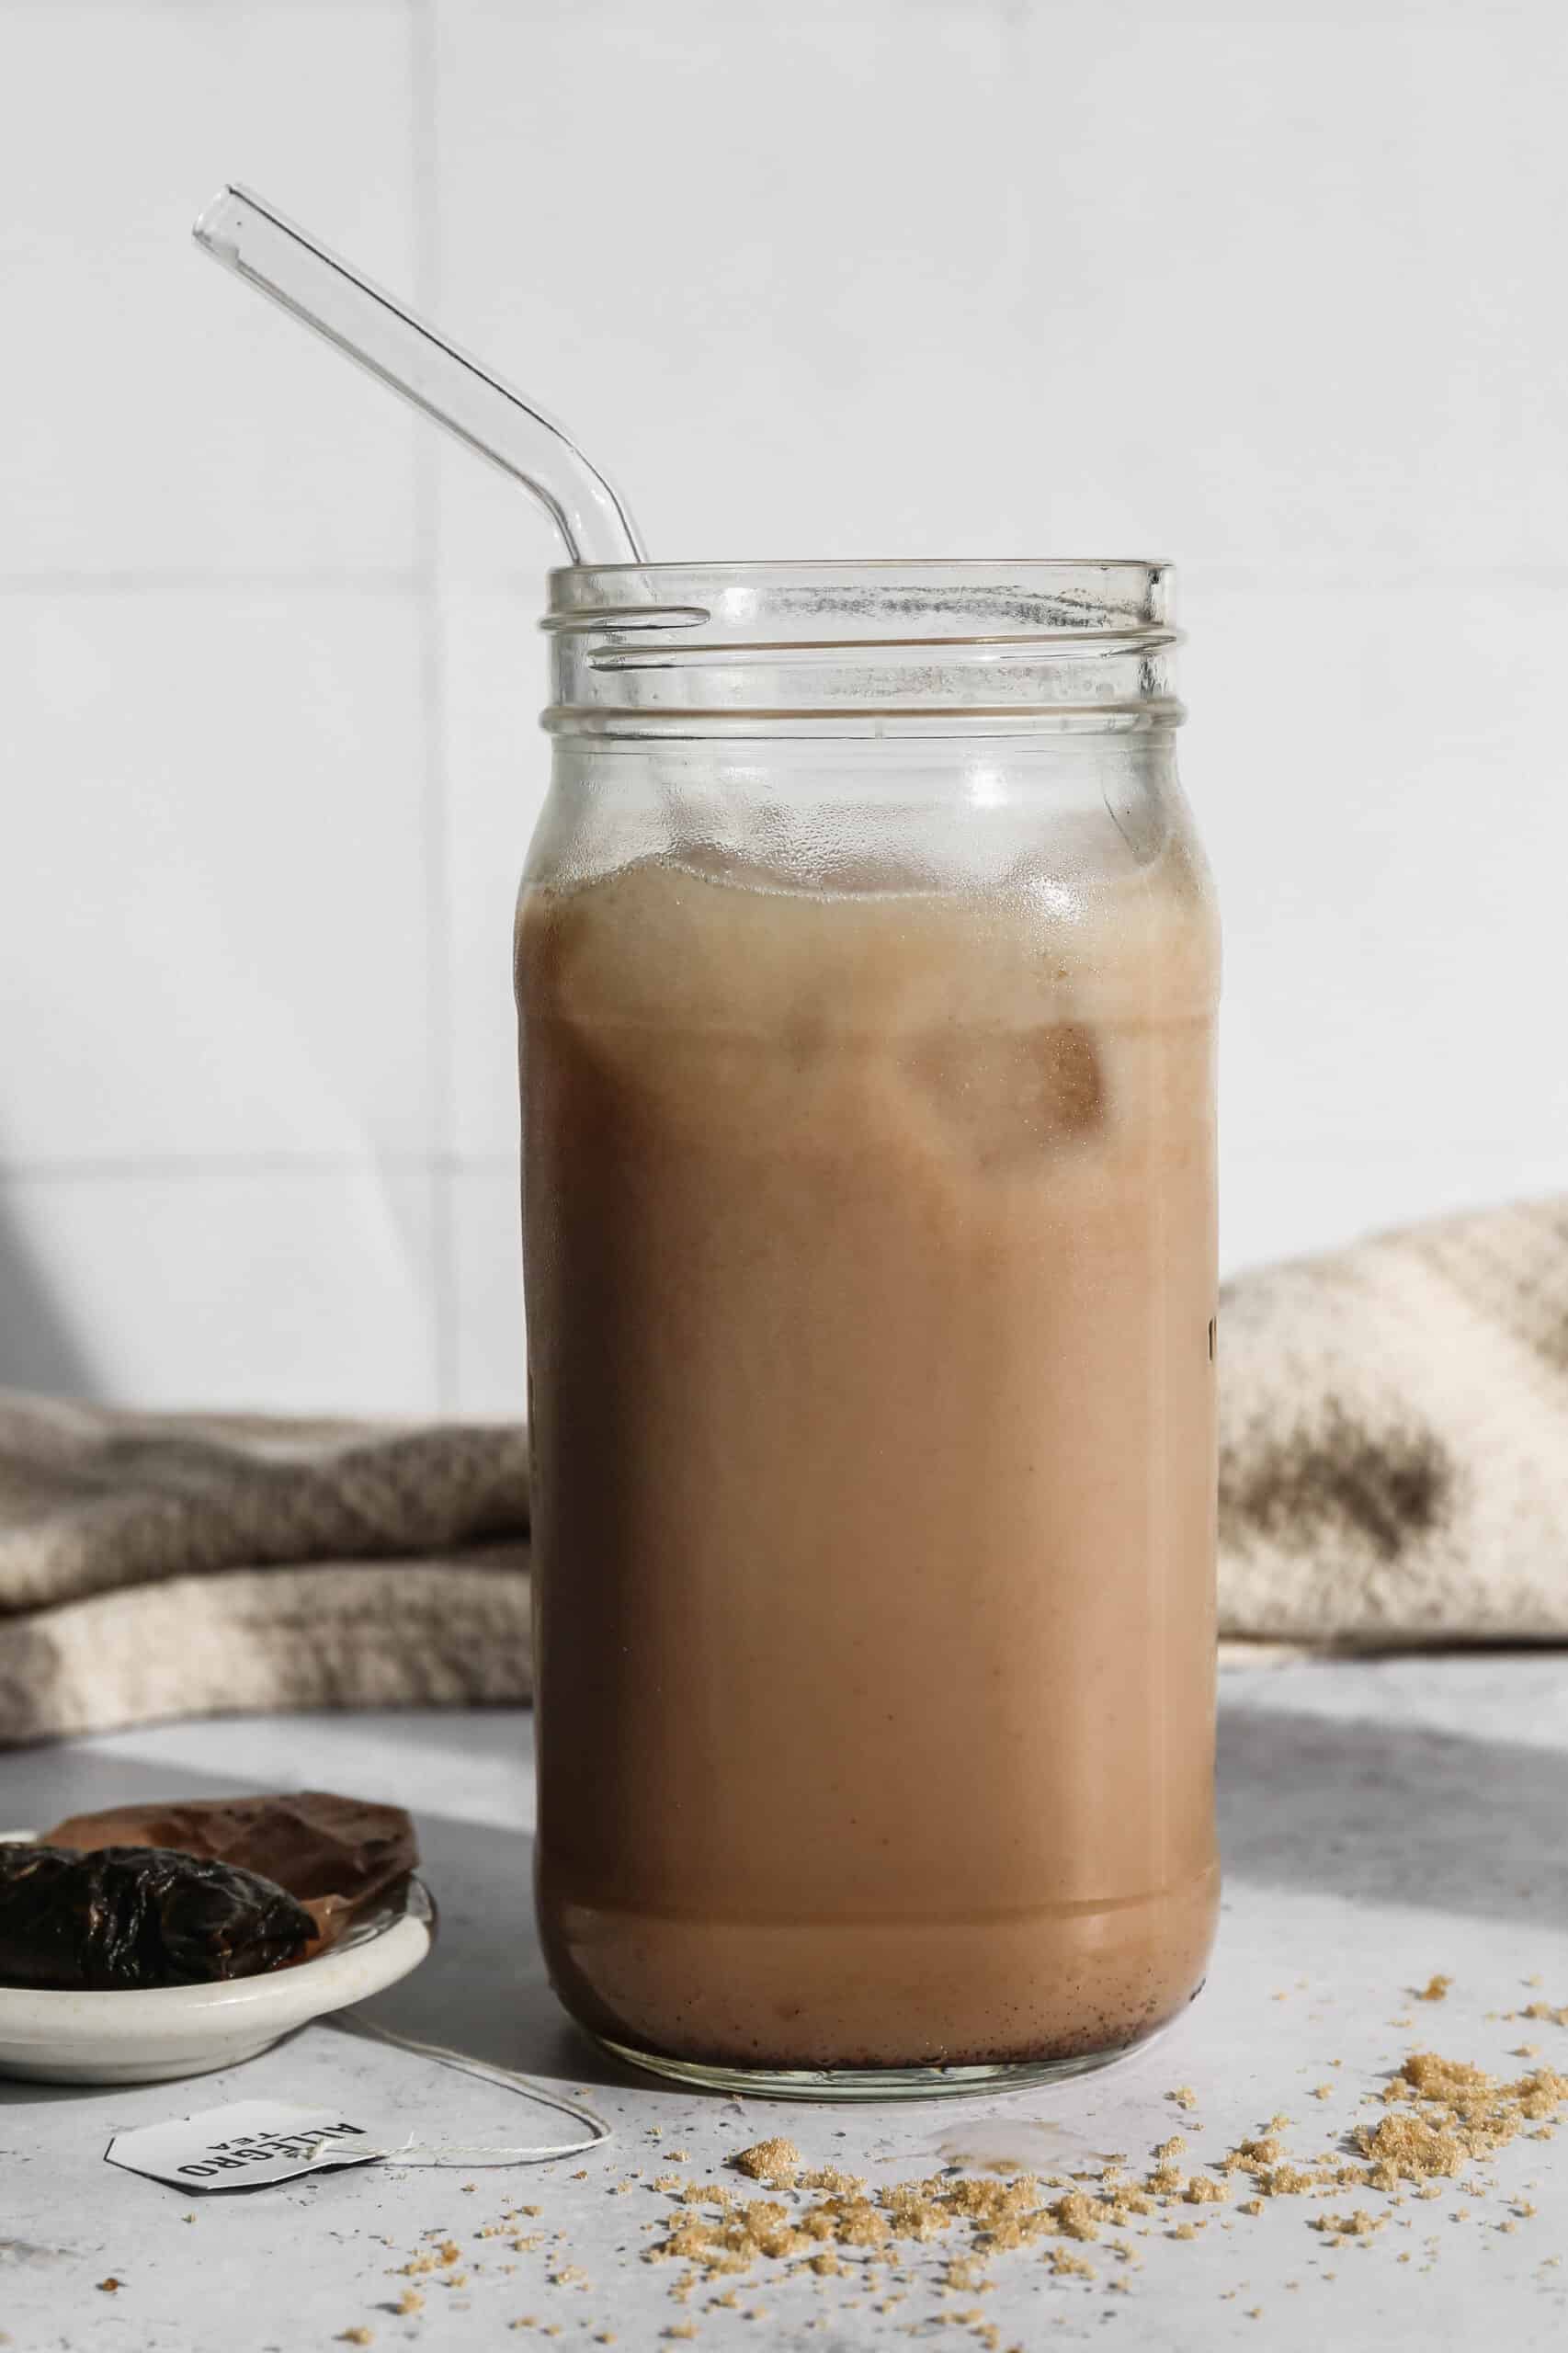 a glass jar of iced chair tea latte concentrate made into a drink using almond milk.